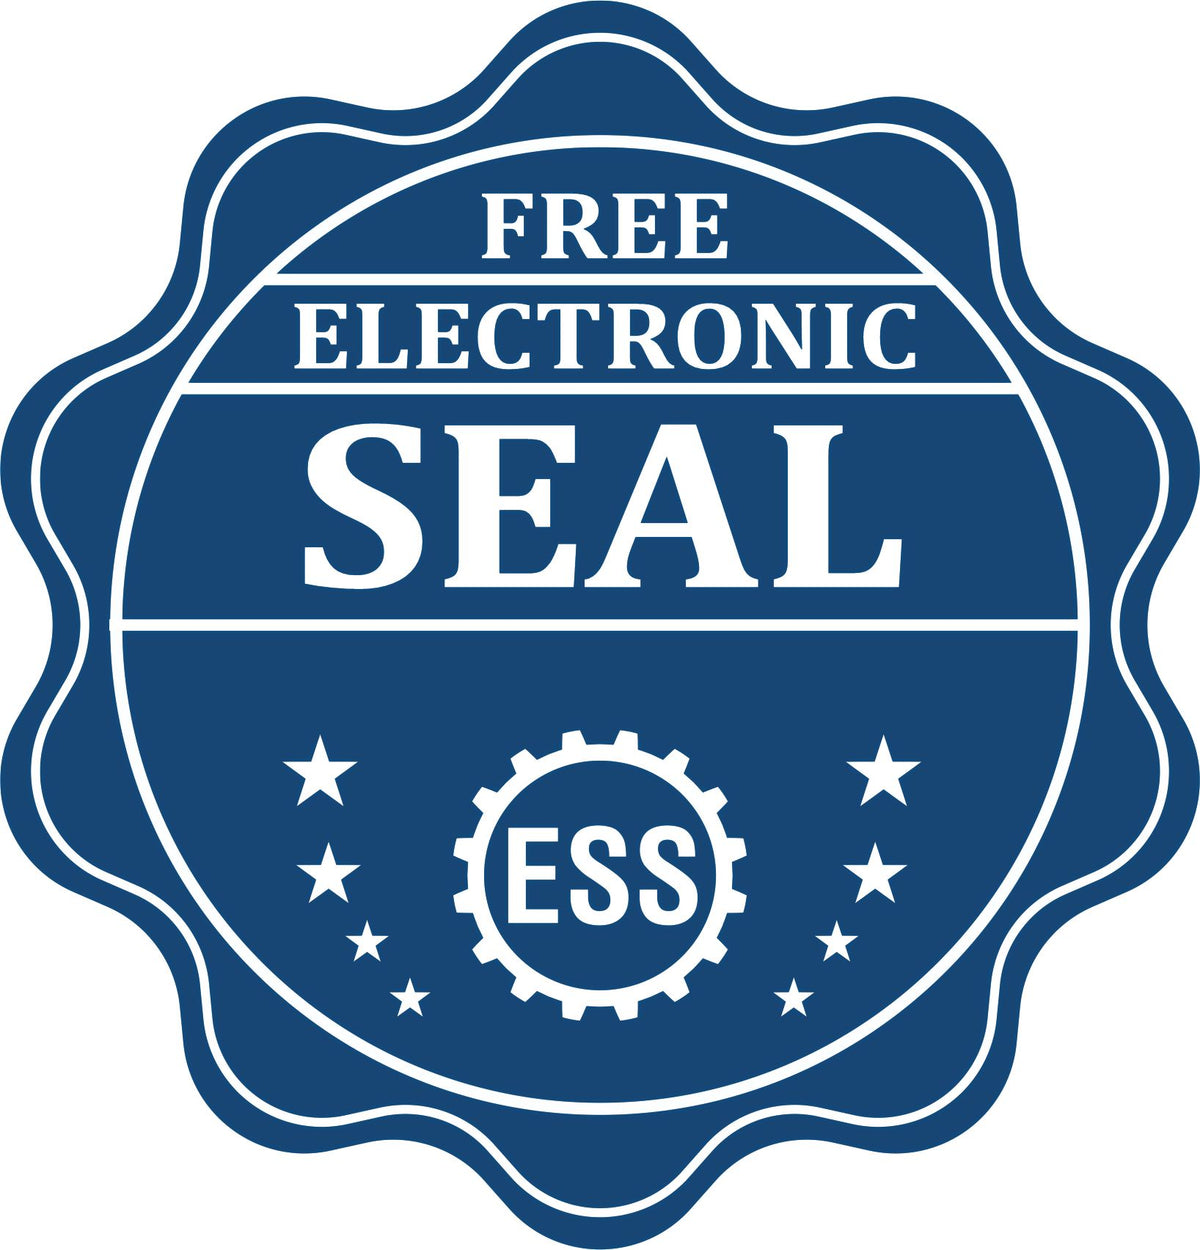 A badge showing a free electronic seal for the Soft Pocket Kentucky Landscape Architect Embosser with stars and the ESS gear on the emblem.